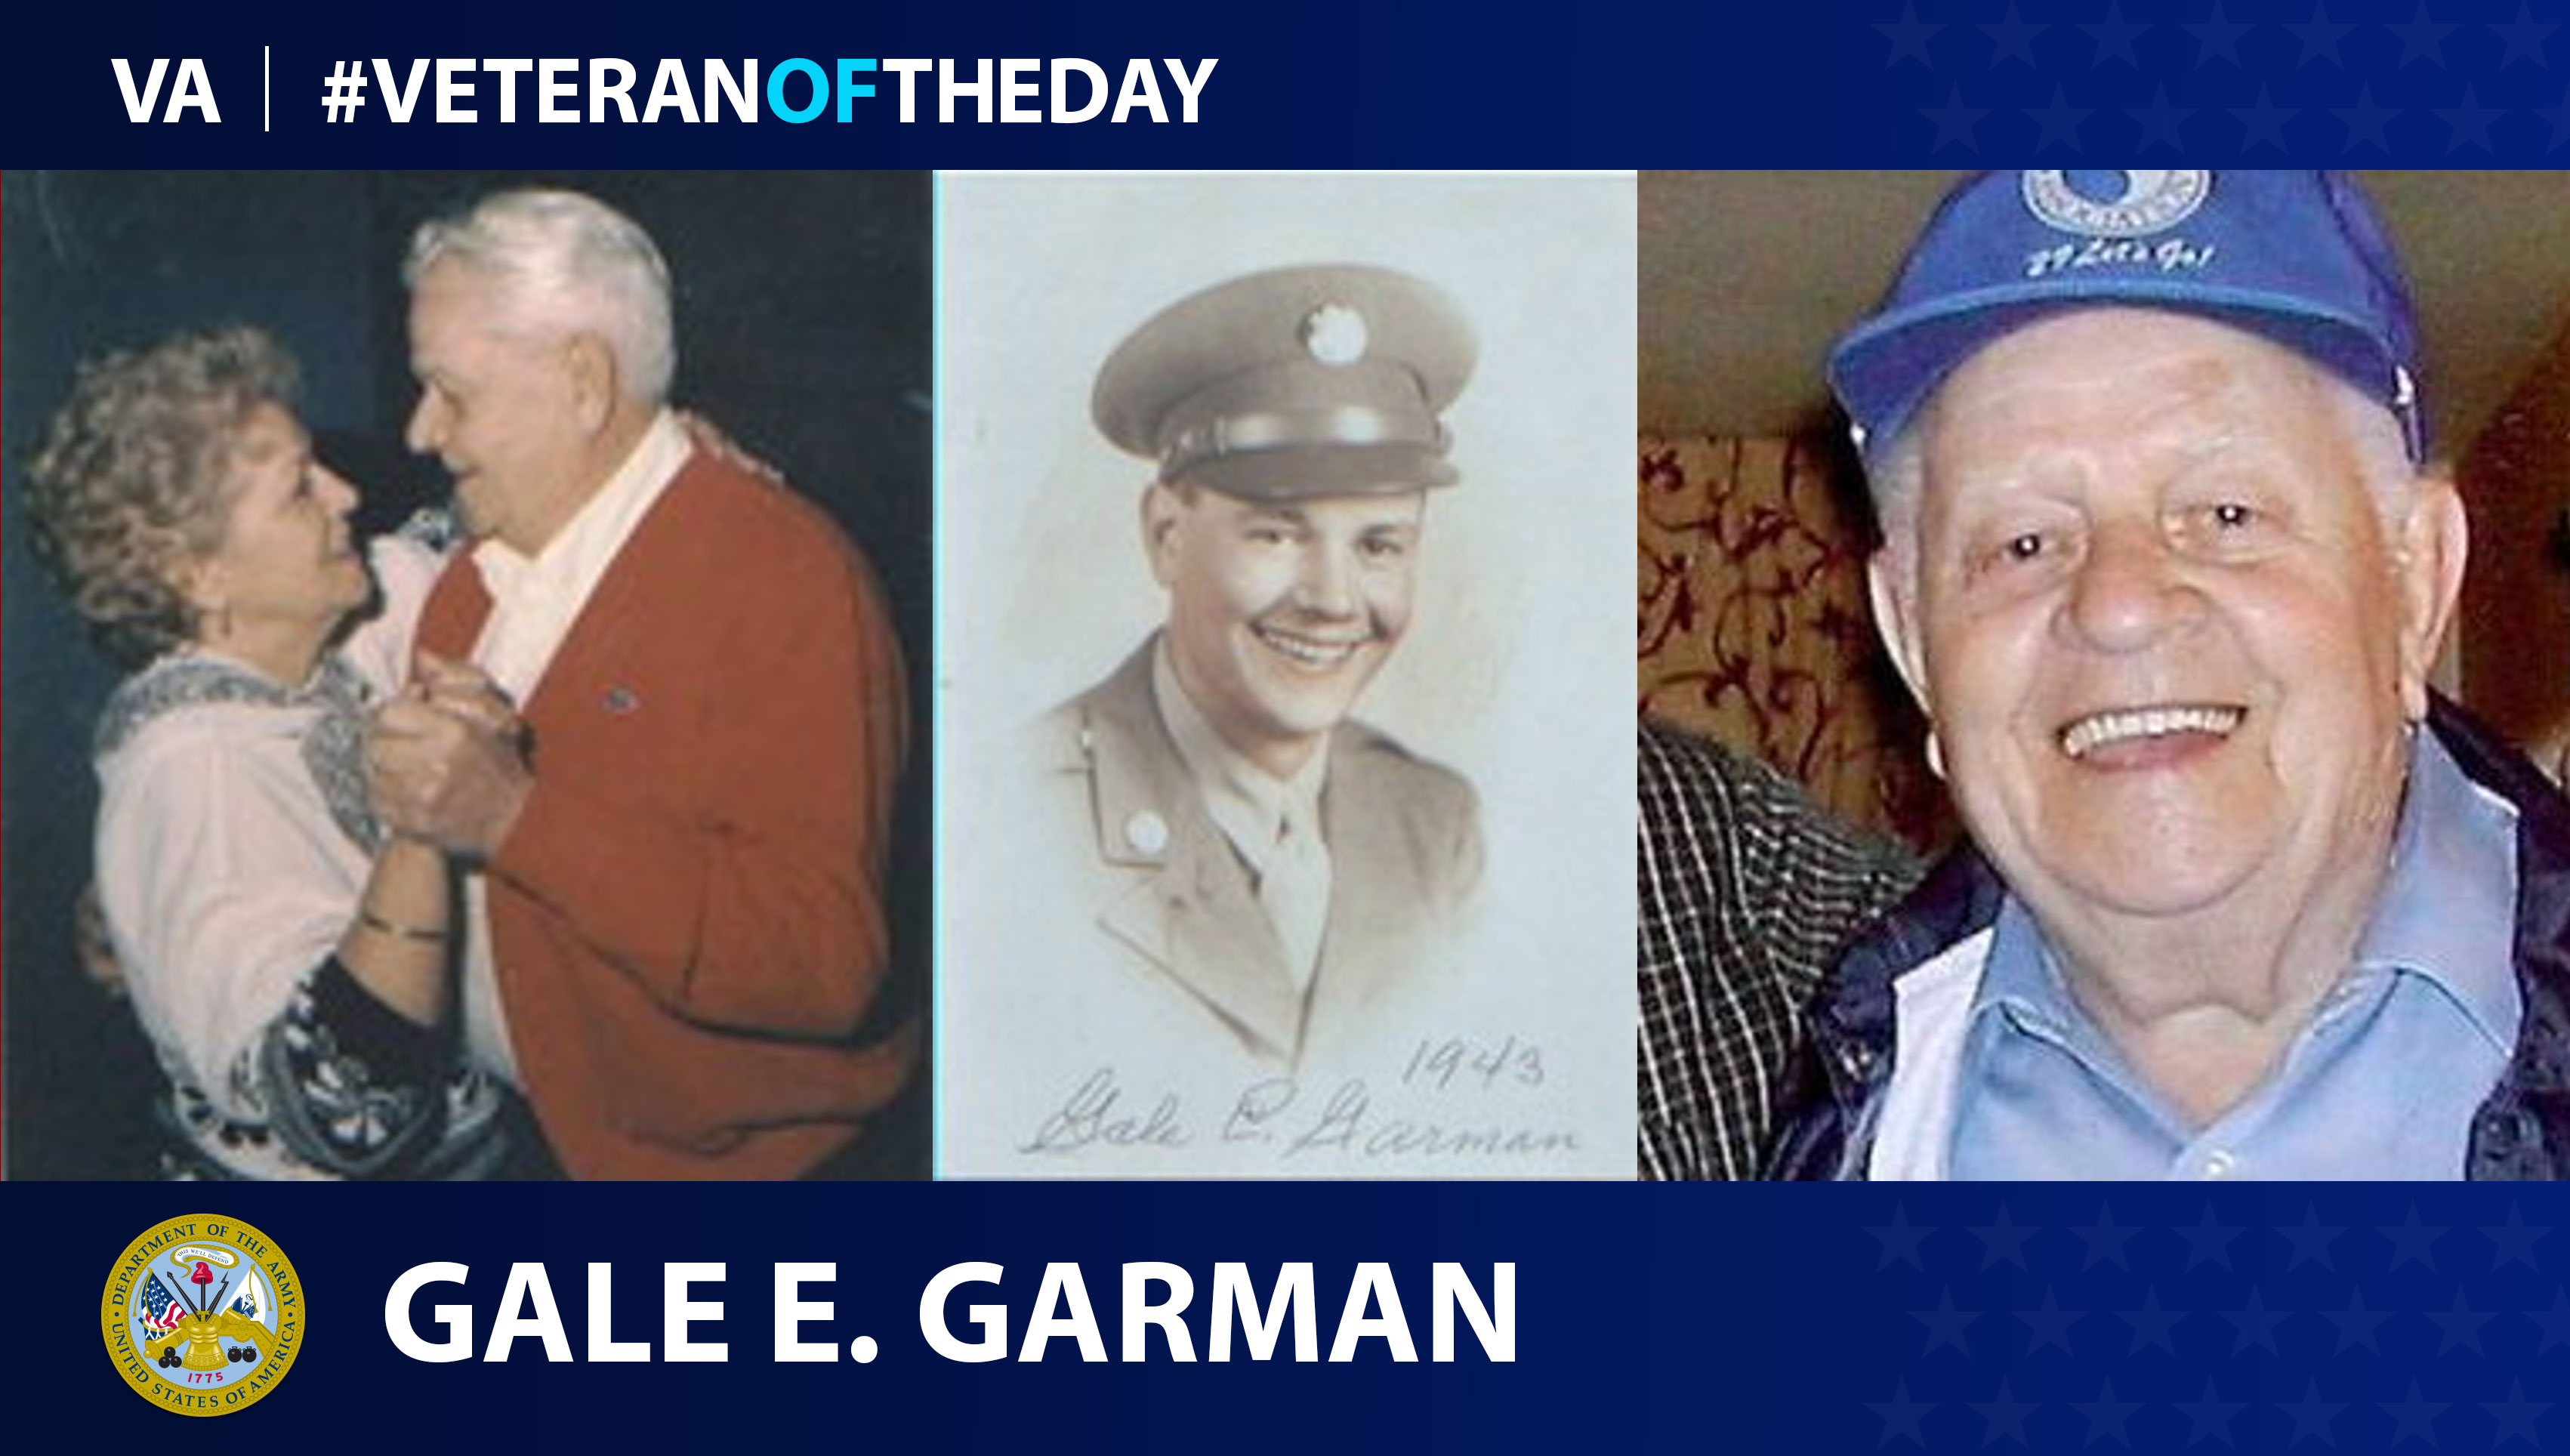 Army Veteran Gale Garman is today's Veteran of the day.